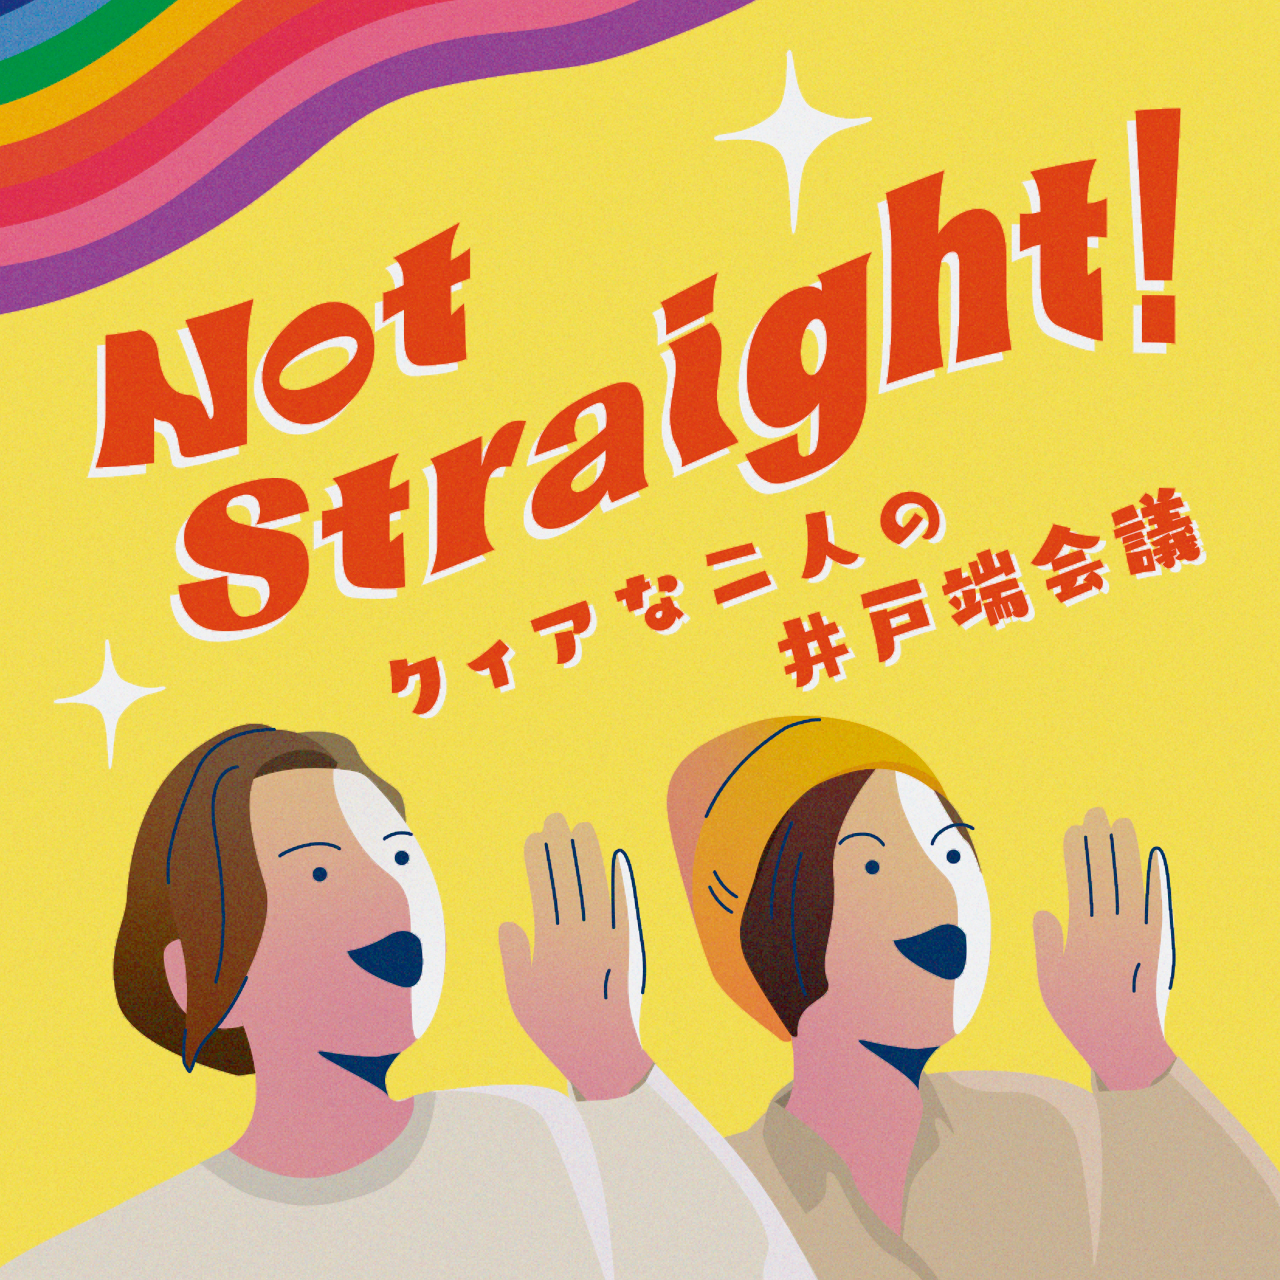 Podcast番組「Not Straight!」ライブ配信イベント<br>Podcast「Not Straight!」live streaming event